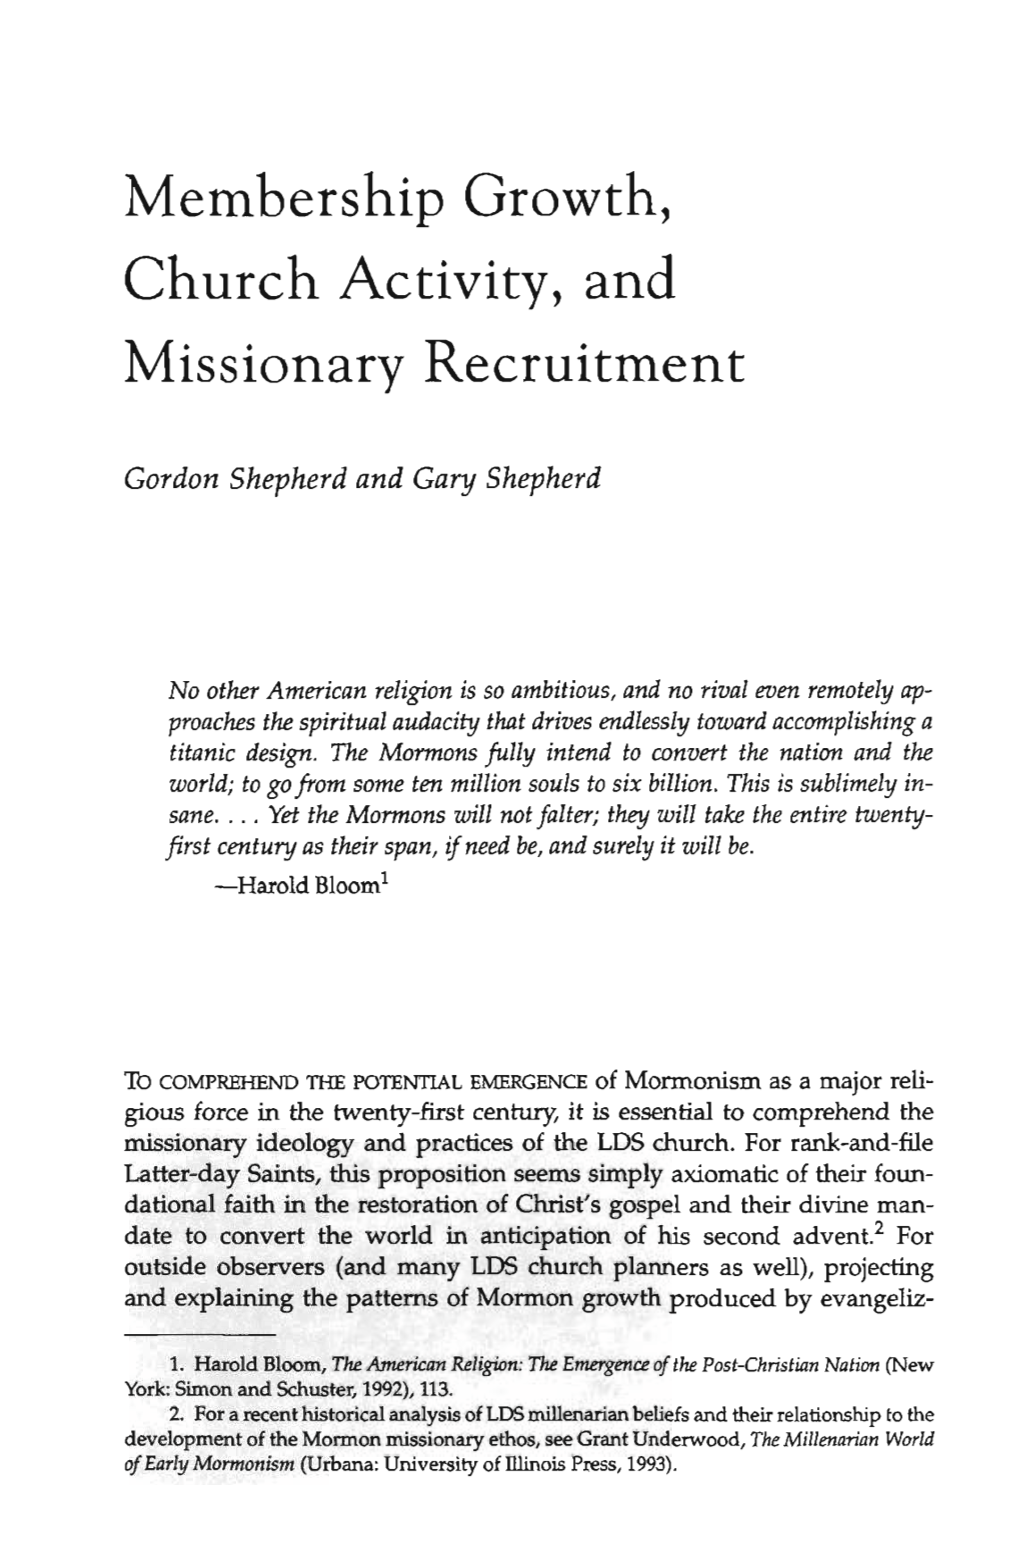 Membership Growth, Church Activity, and Missionary Recruitment